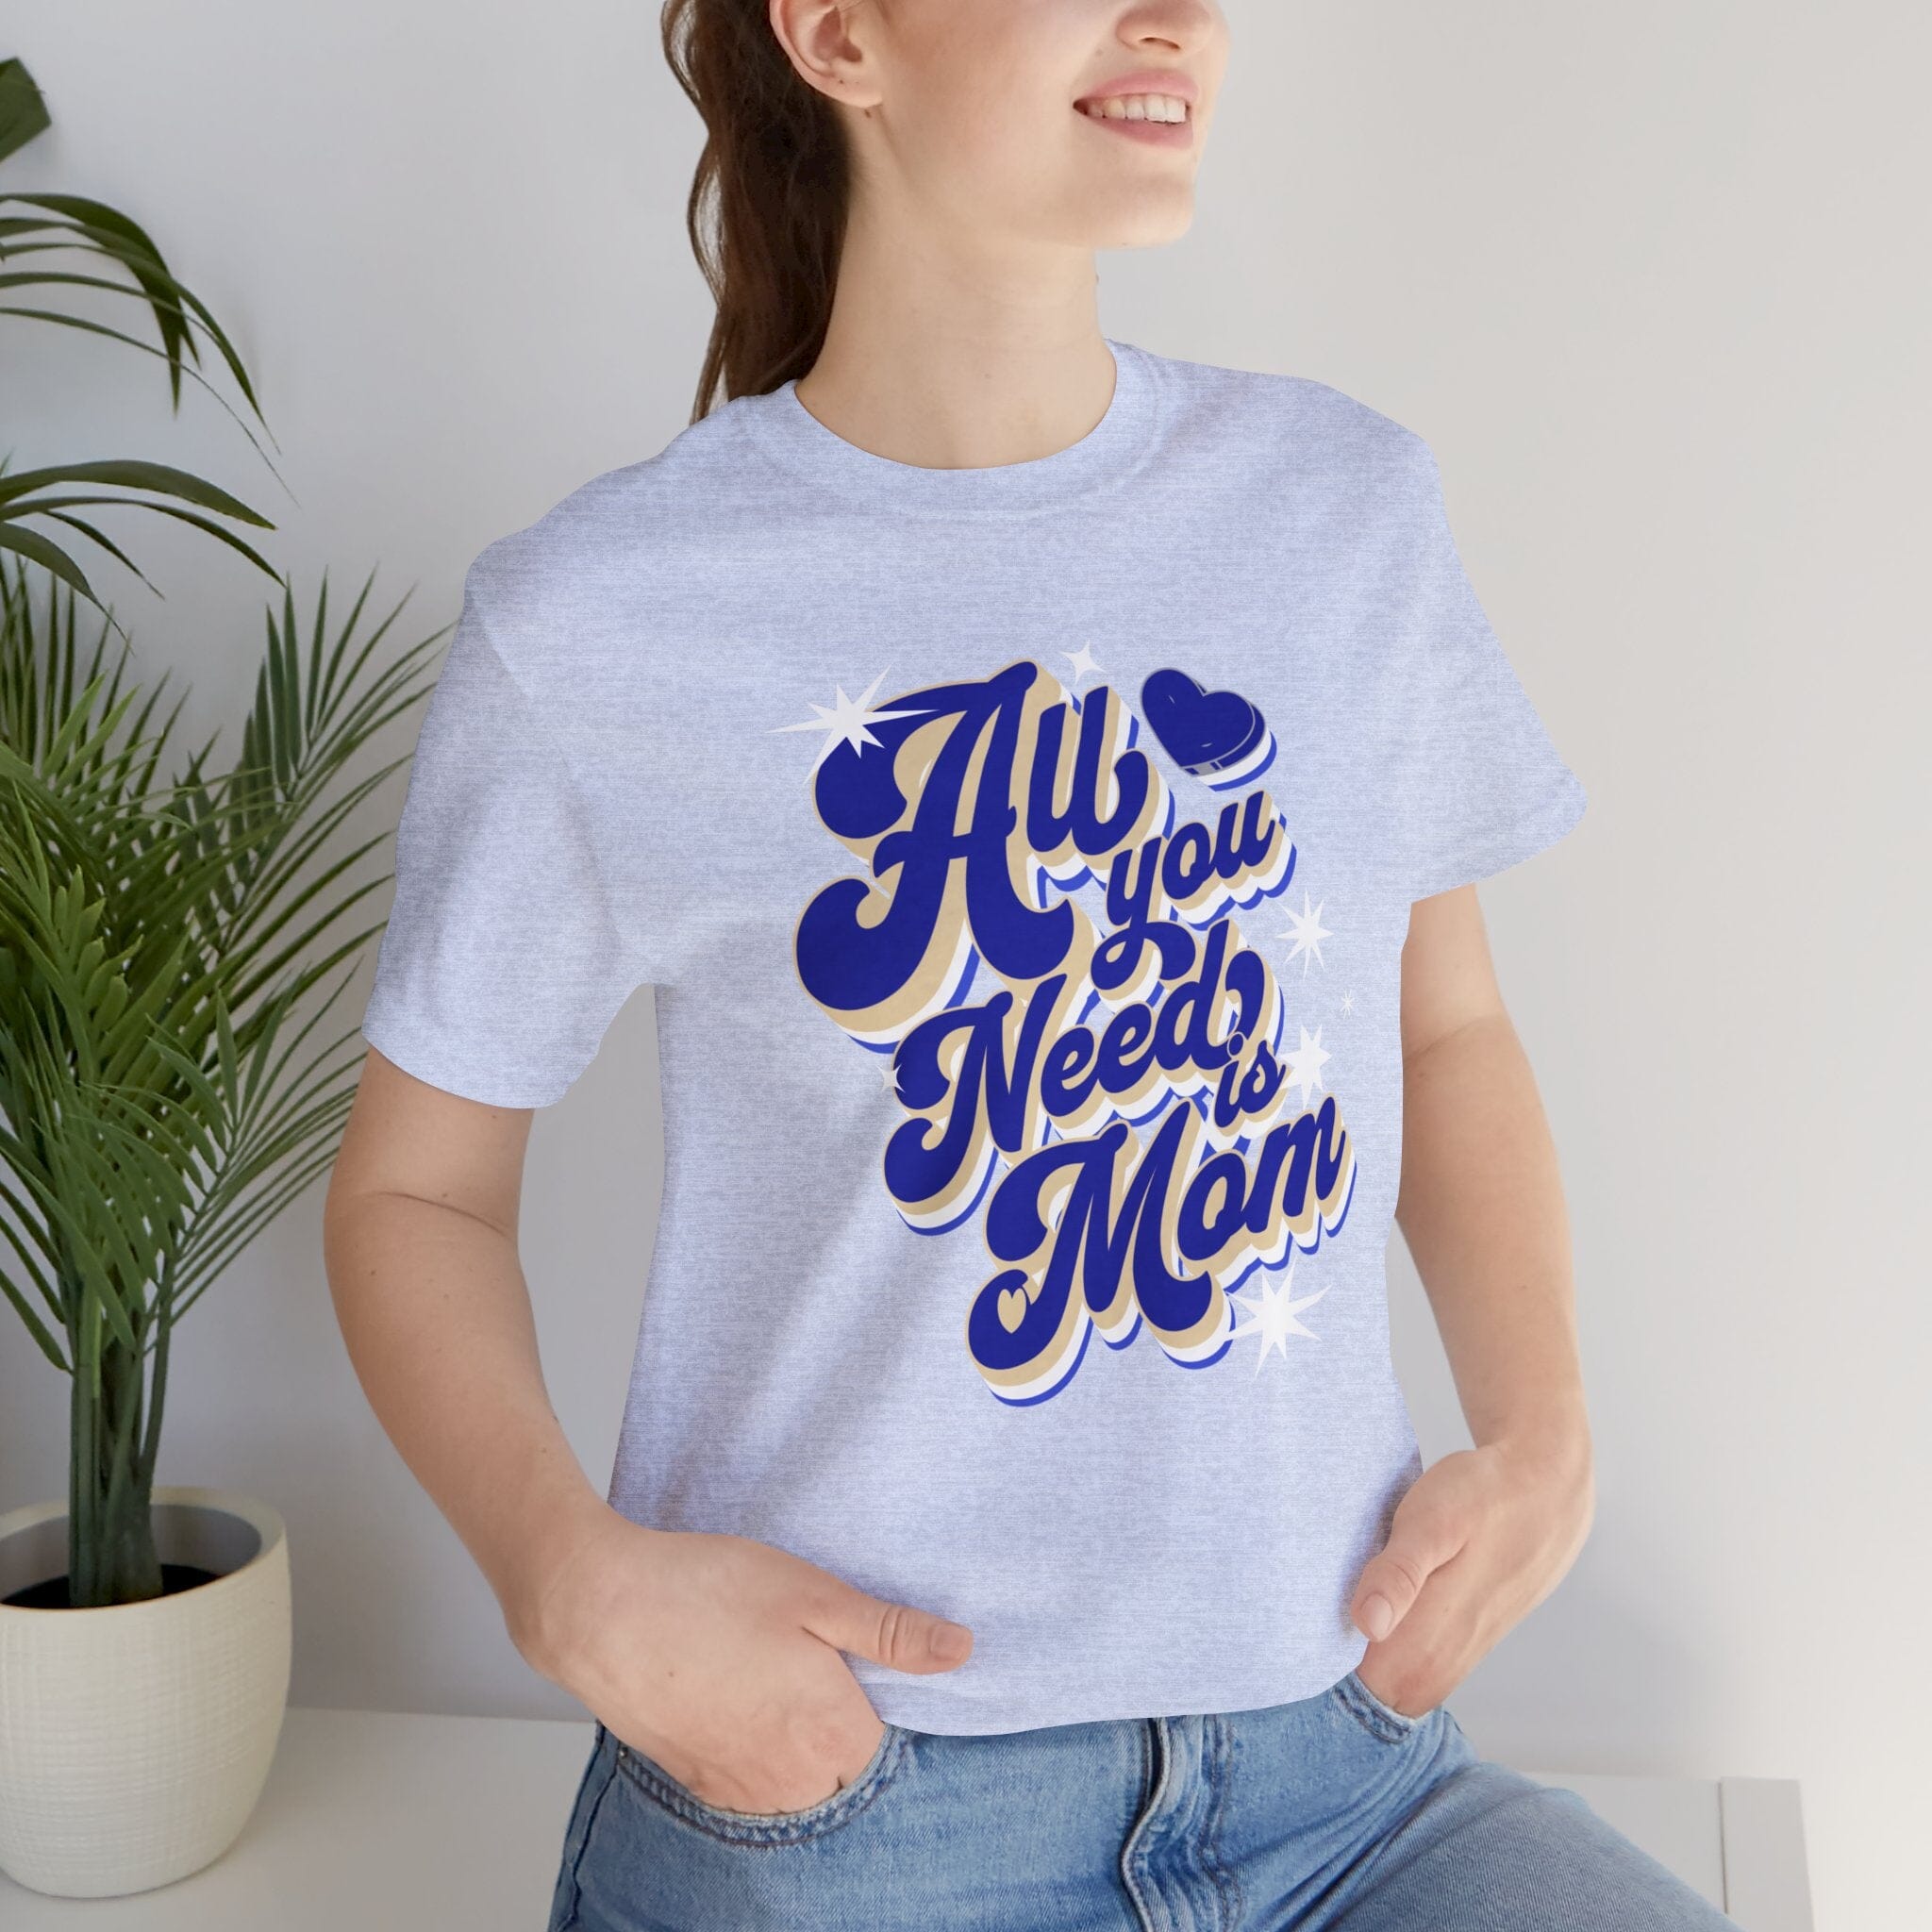 All You Need Is Mom | Womens Short Sleeve Bella Tee | 3 colors | S-4XL | Hope Swag T-Shirt Printify Heather Prism Blue S 